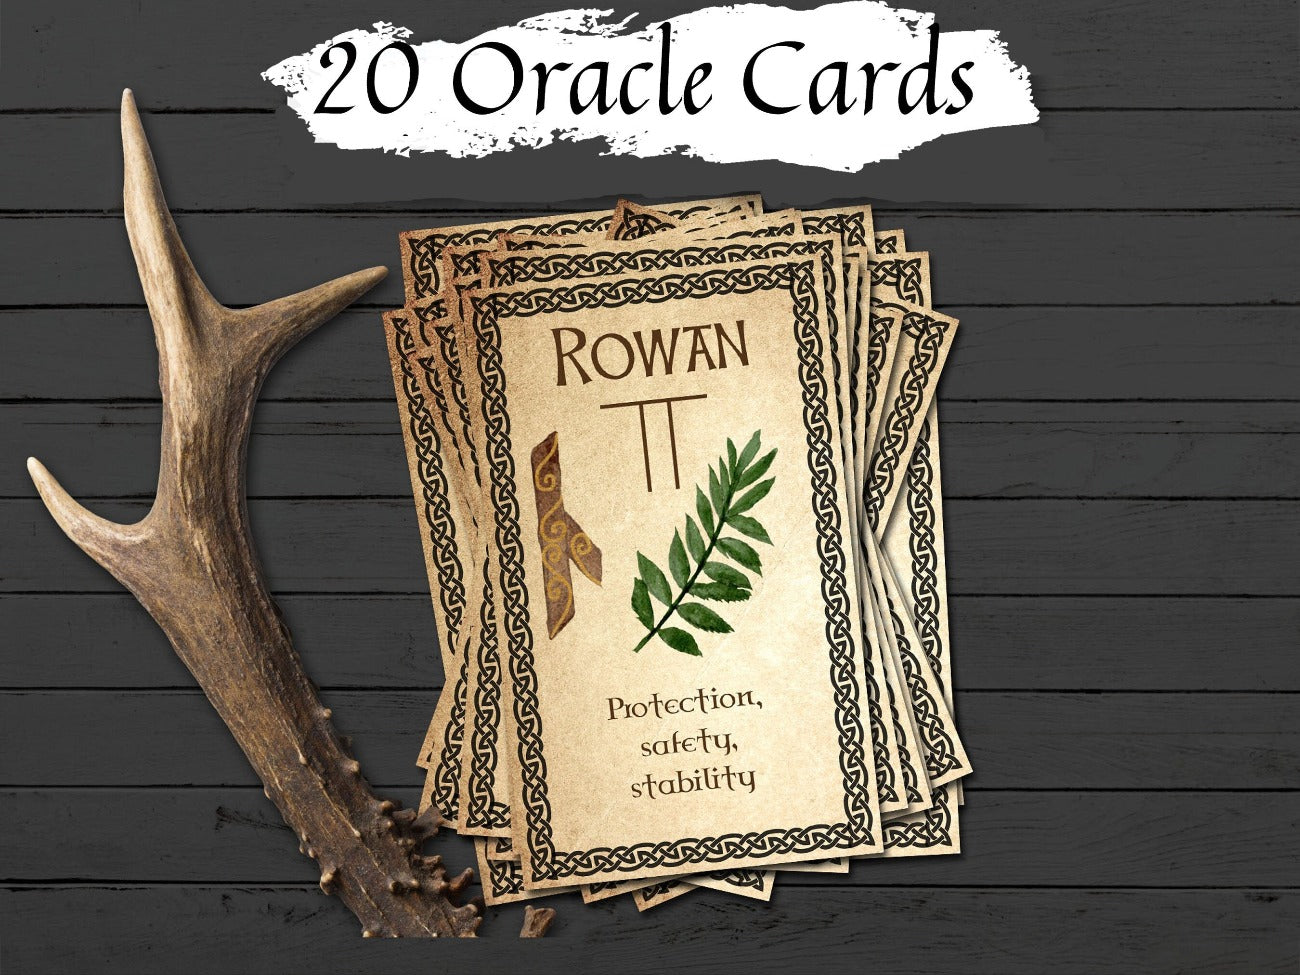 OGHAM ORACLE CARDS Wicca Witchcraft Oracle Cards to Print at Home, Ogham Tarot Printable Oracle Deck Messages, Celtic Ogham Spirit Deck - Morgana Magick Spell